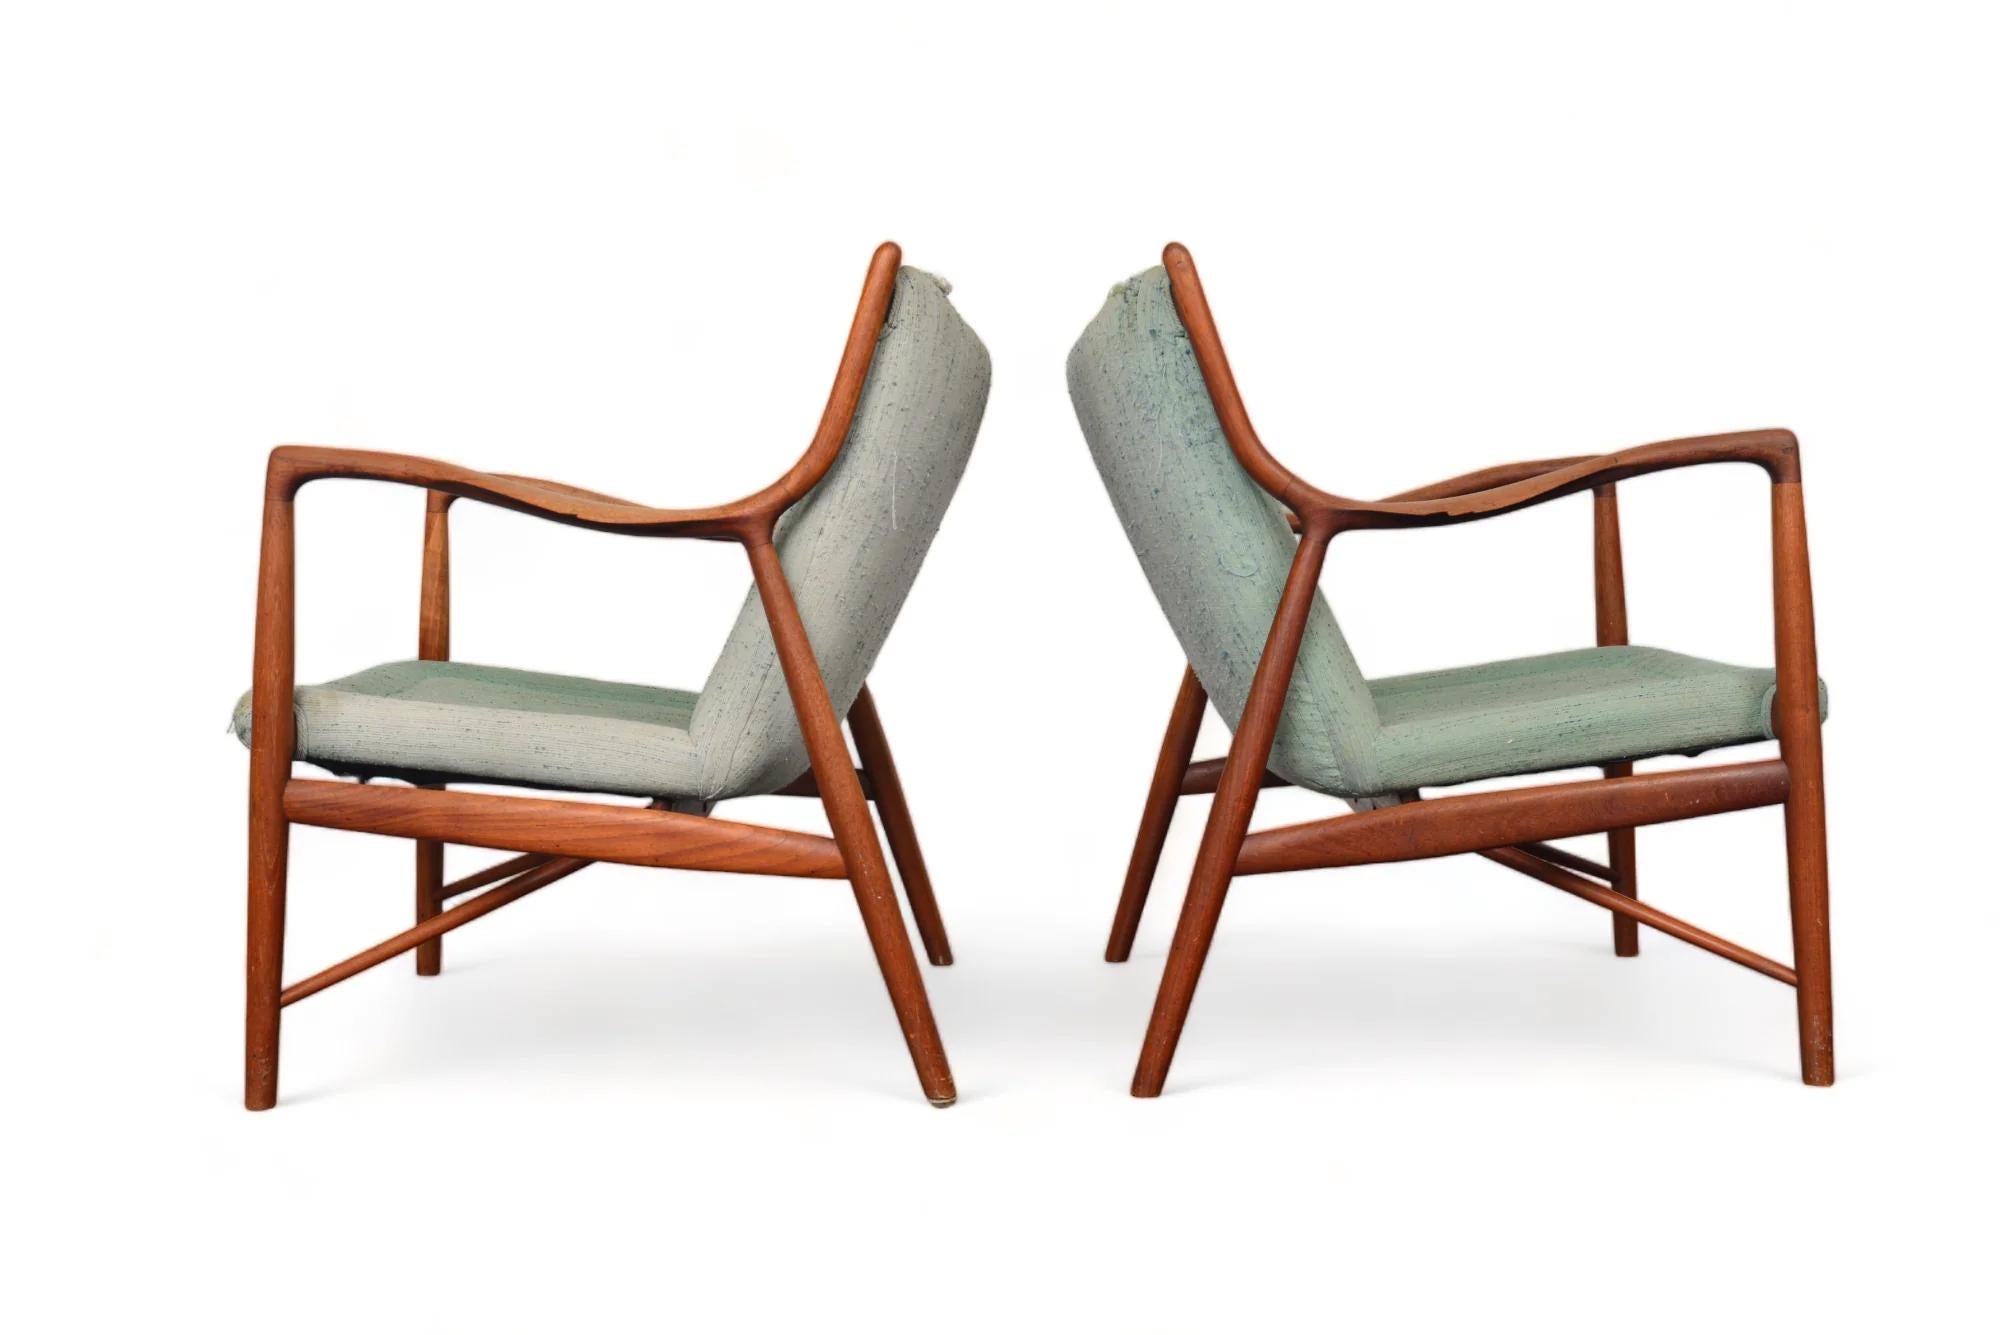 20th Century Rare Pair Of Finn Juhl Nv45 Lounge Chairs In Teak For Sale